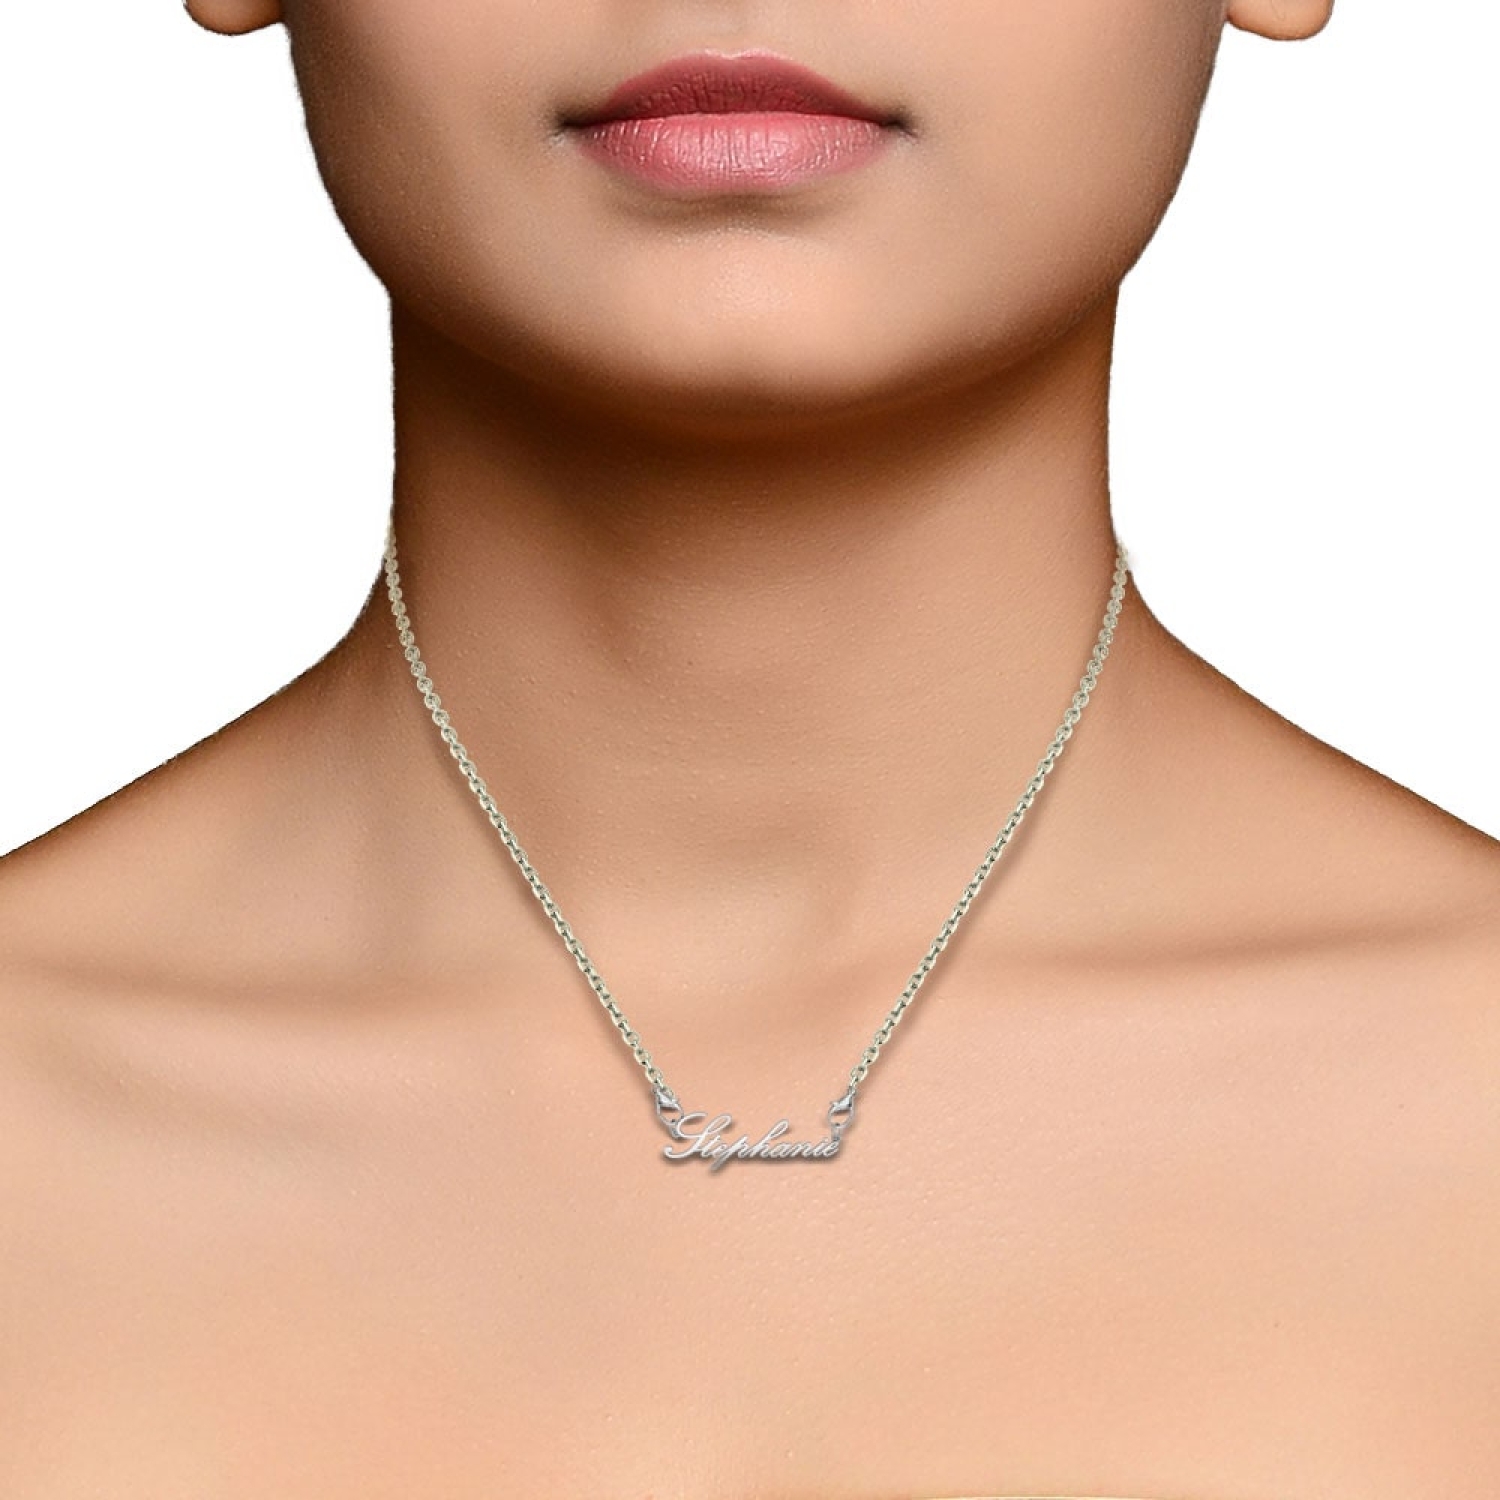 Solid White Gold Vertical Bar Pendant Necklace